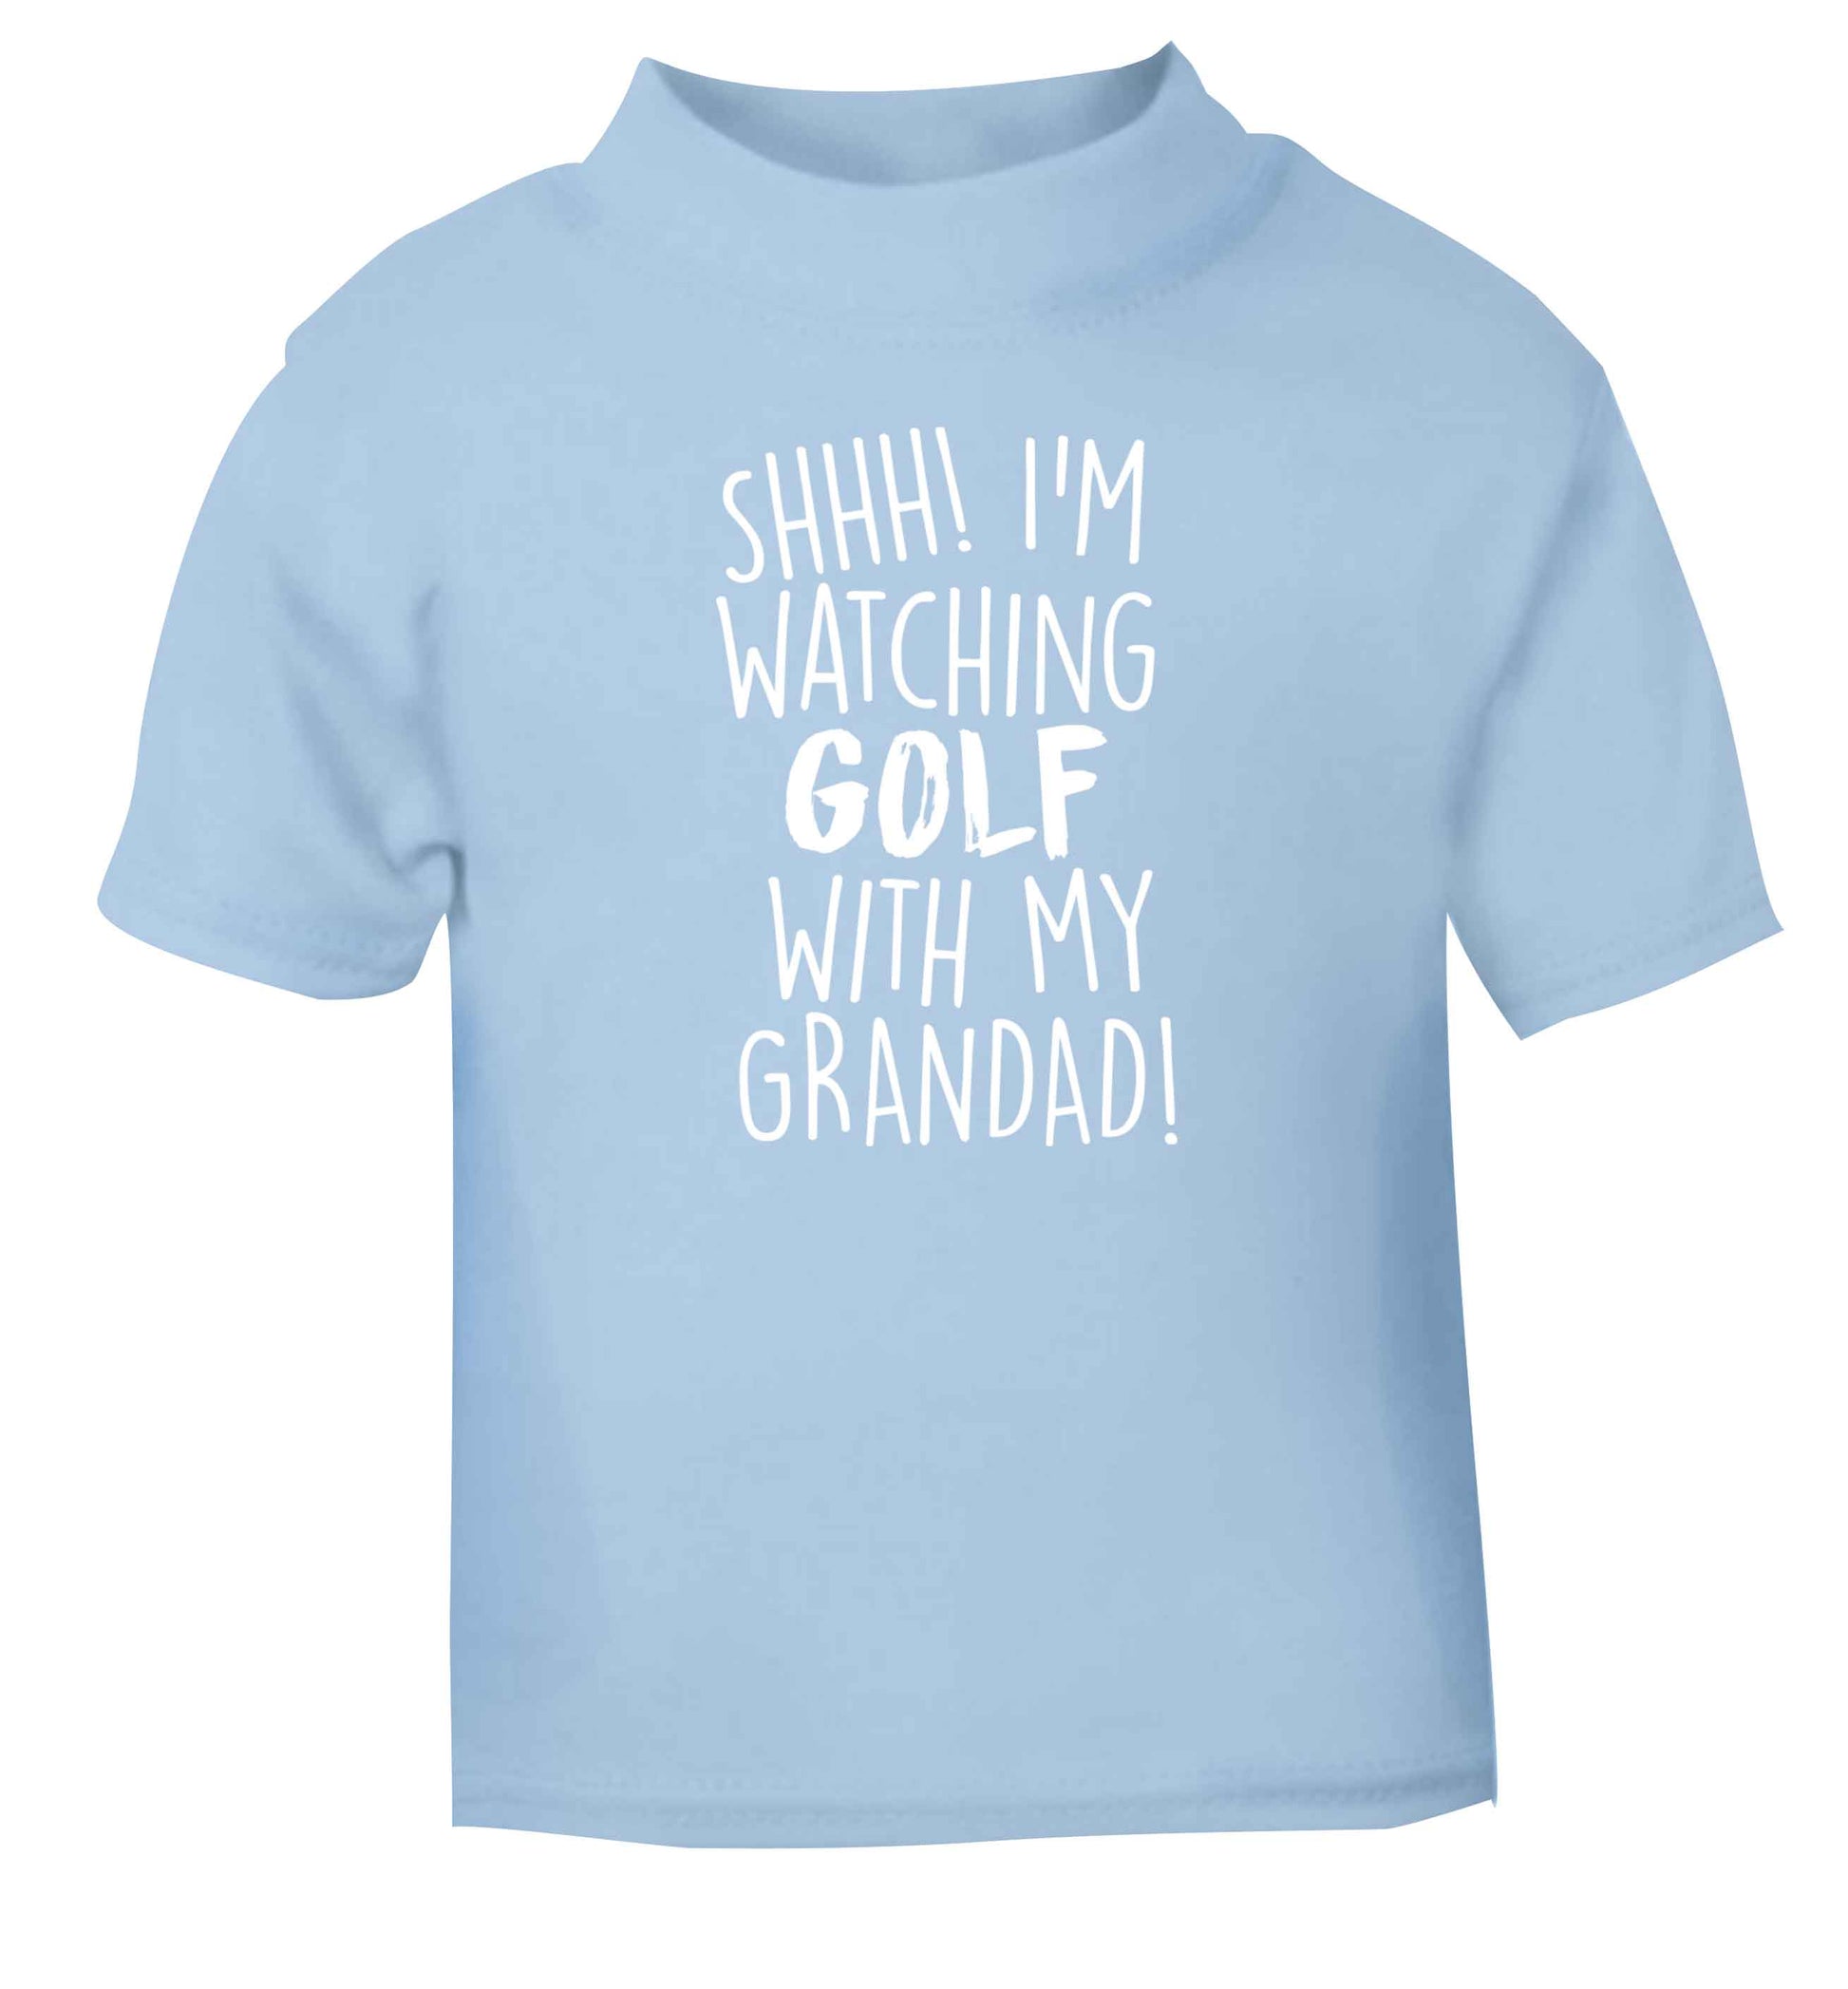 Shh I'm watching golf with my grandad light blue Baby Toddler Tshirt 2 Years